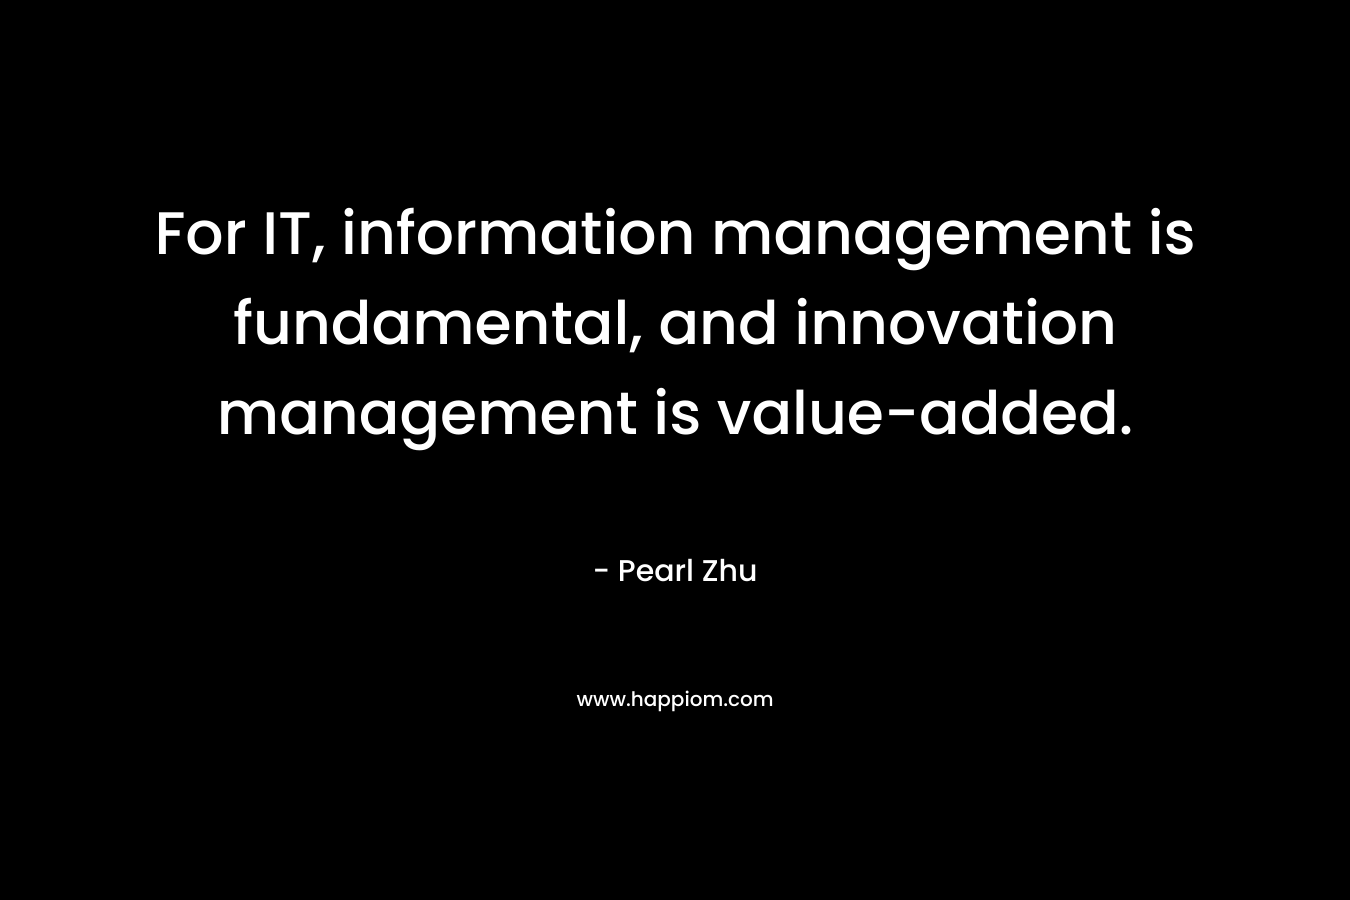 For IT, information management is fundamental, and innovation management is value-added.